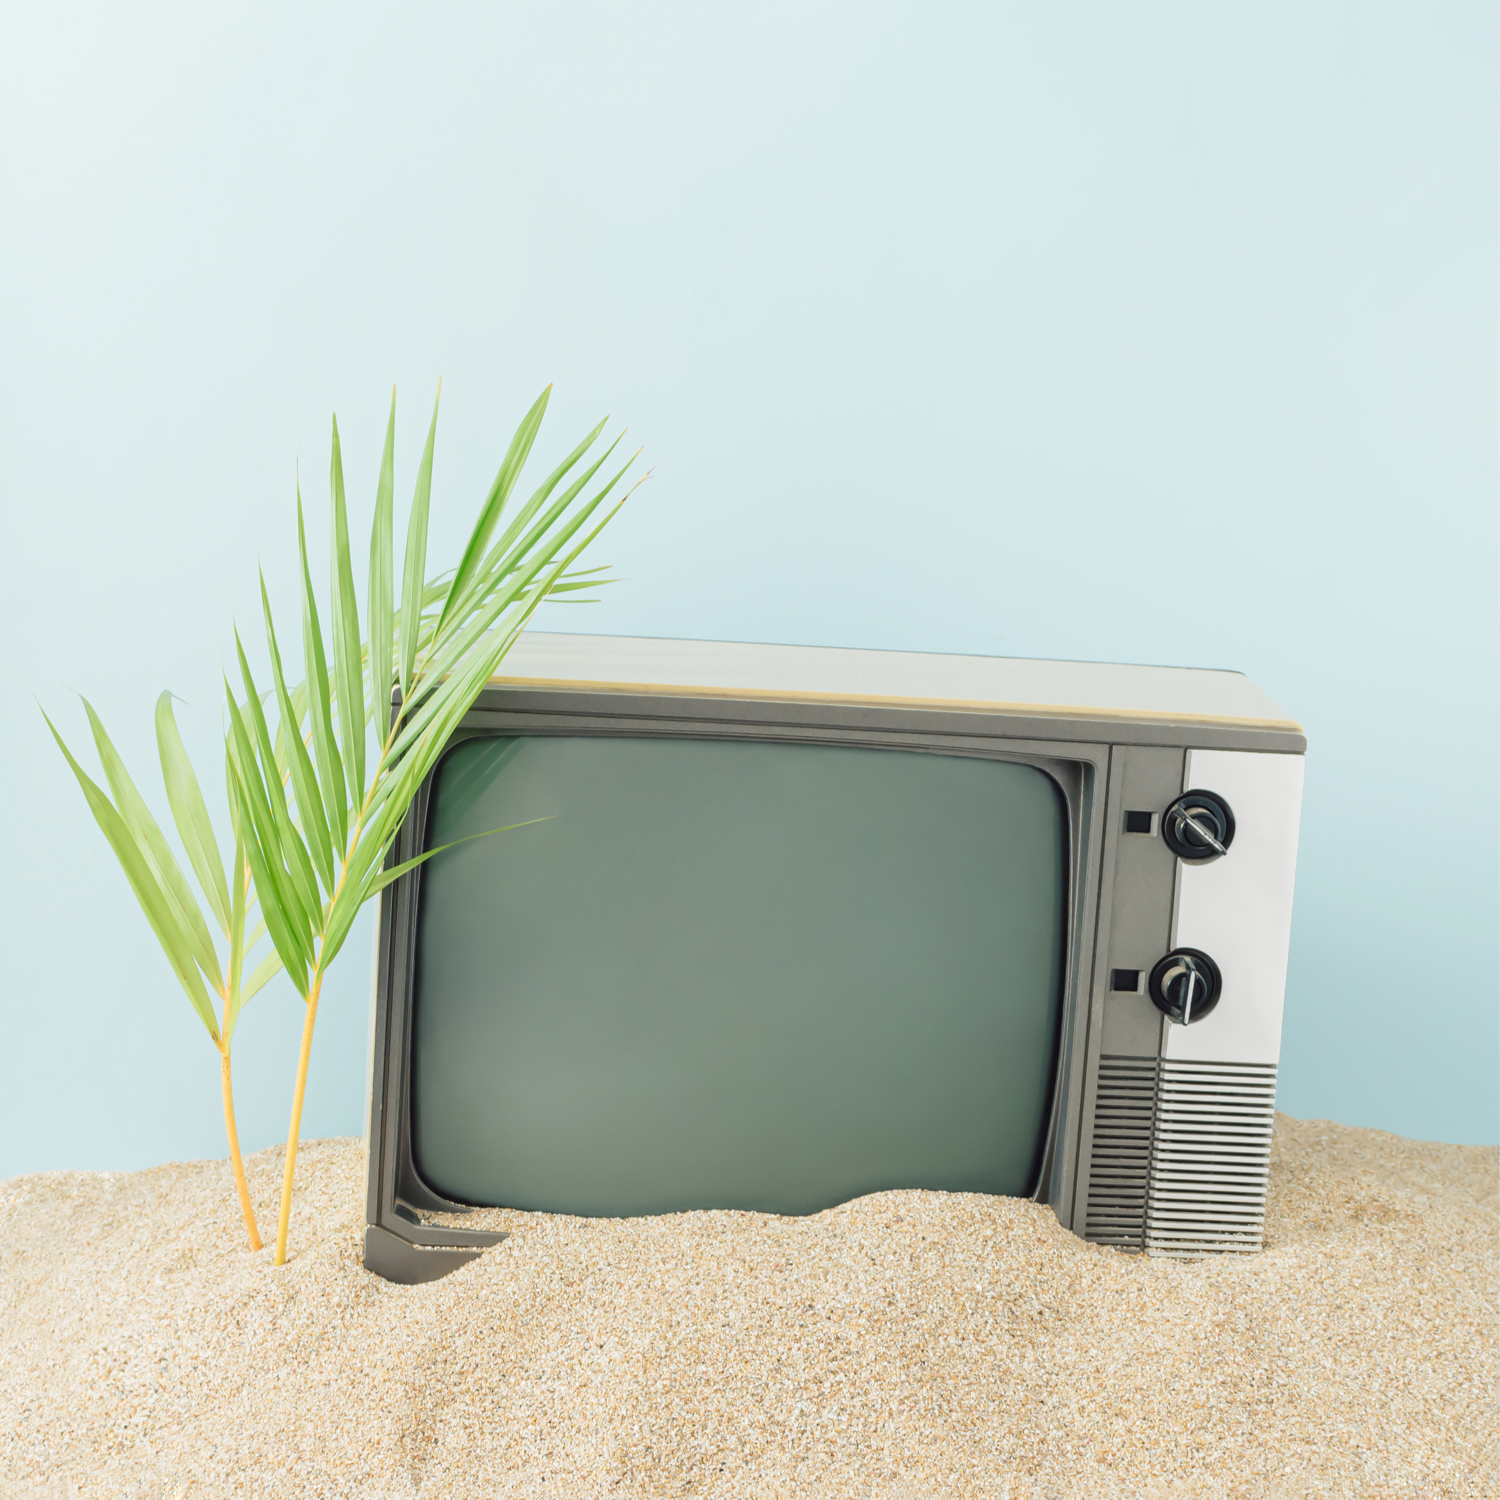 A photo of an old TV sinking in the sand